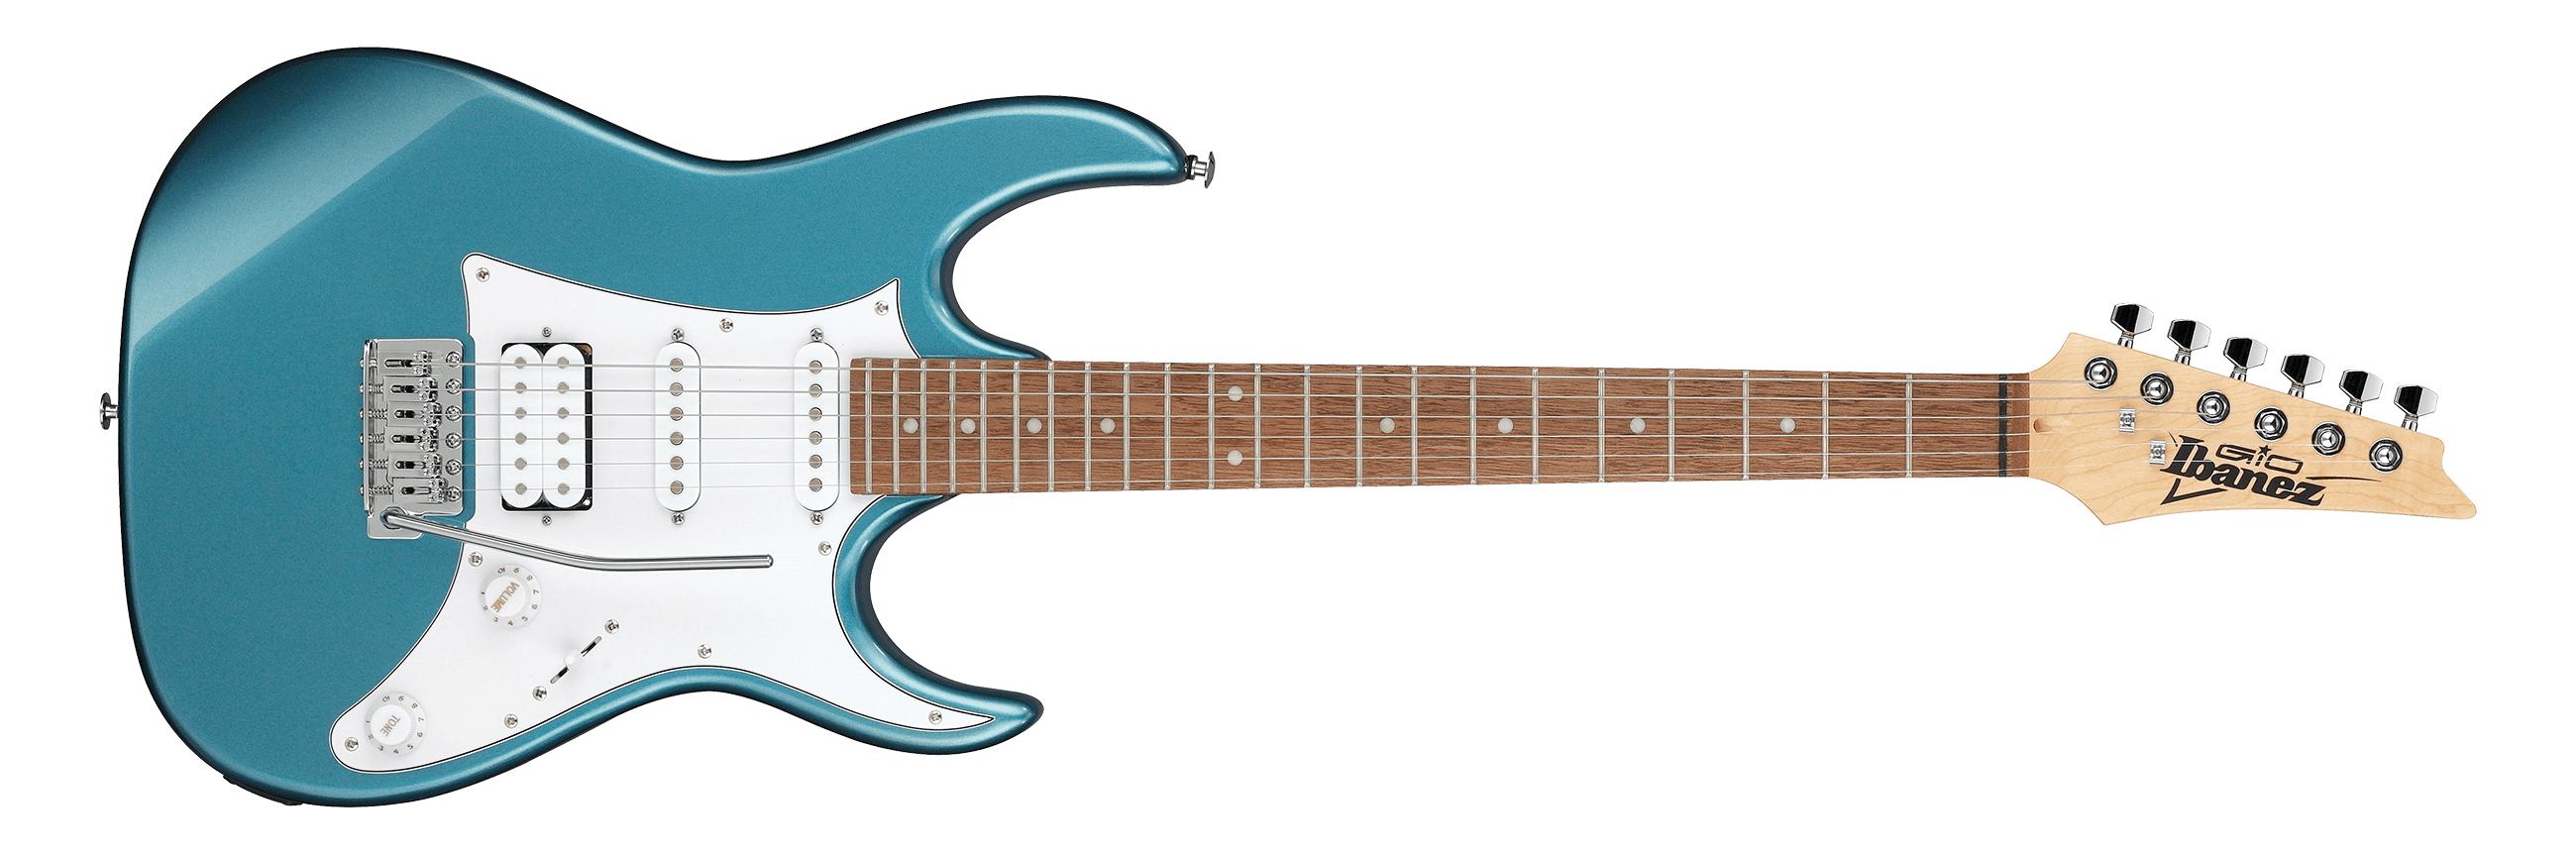 GRX40 | Gio | ELECTRIC GUITARS | PRODUCTS | Ibanez guitars